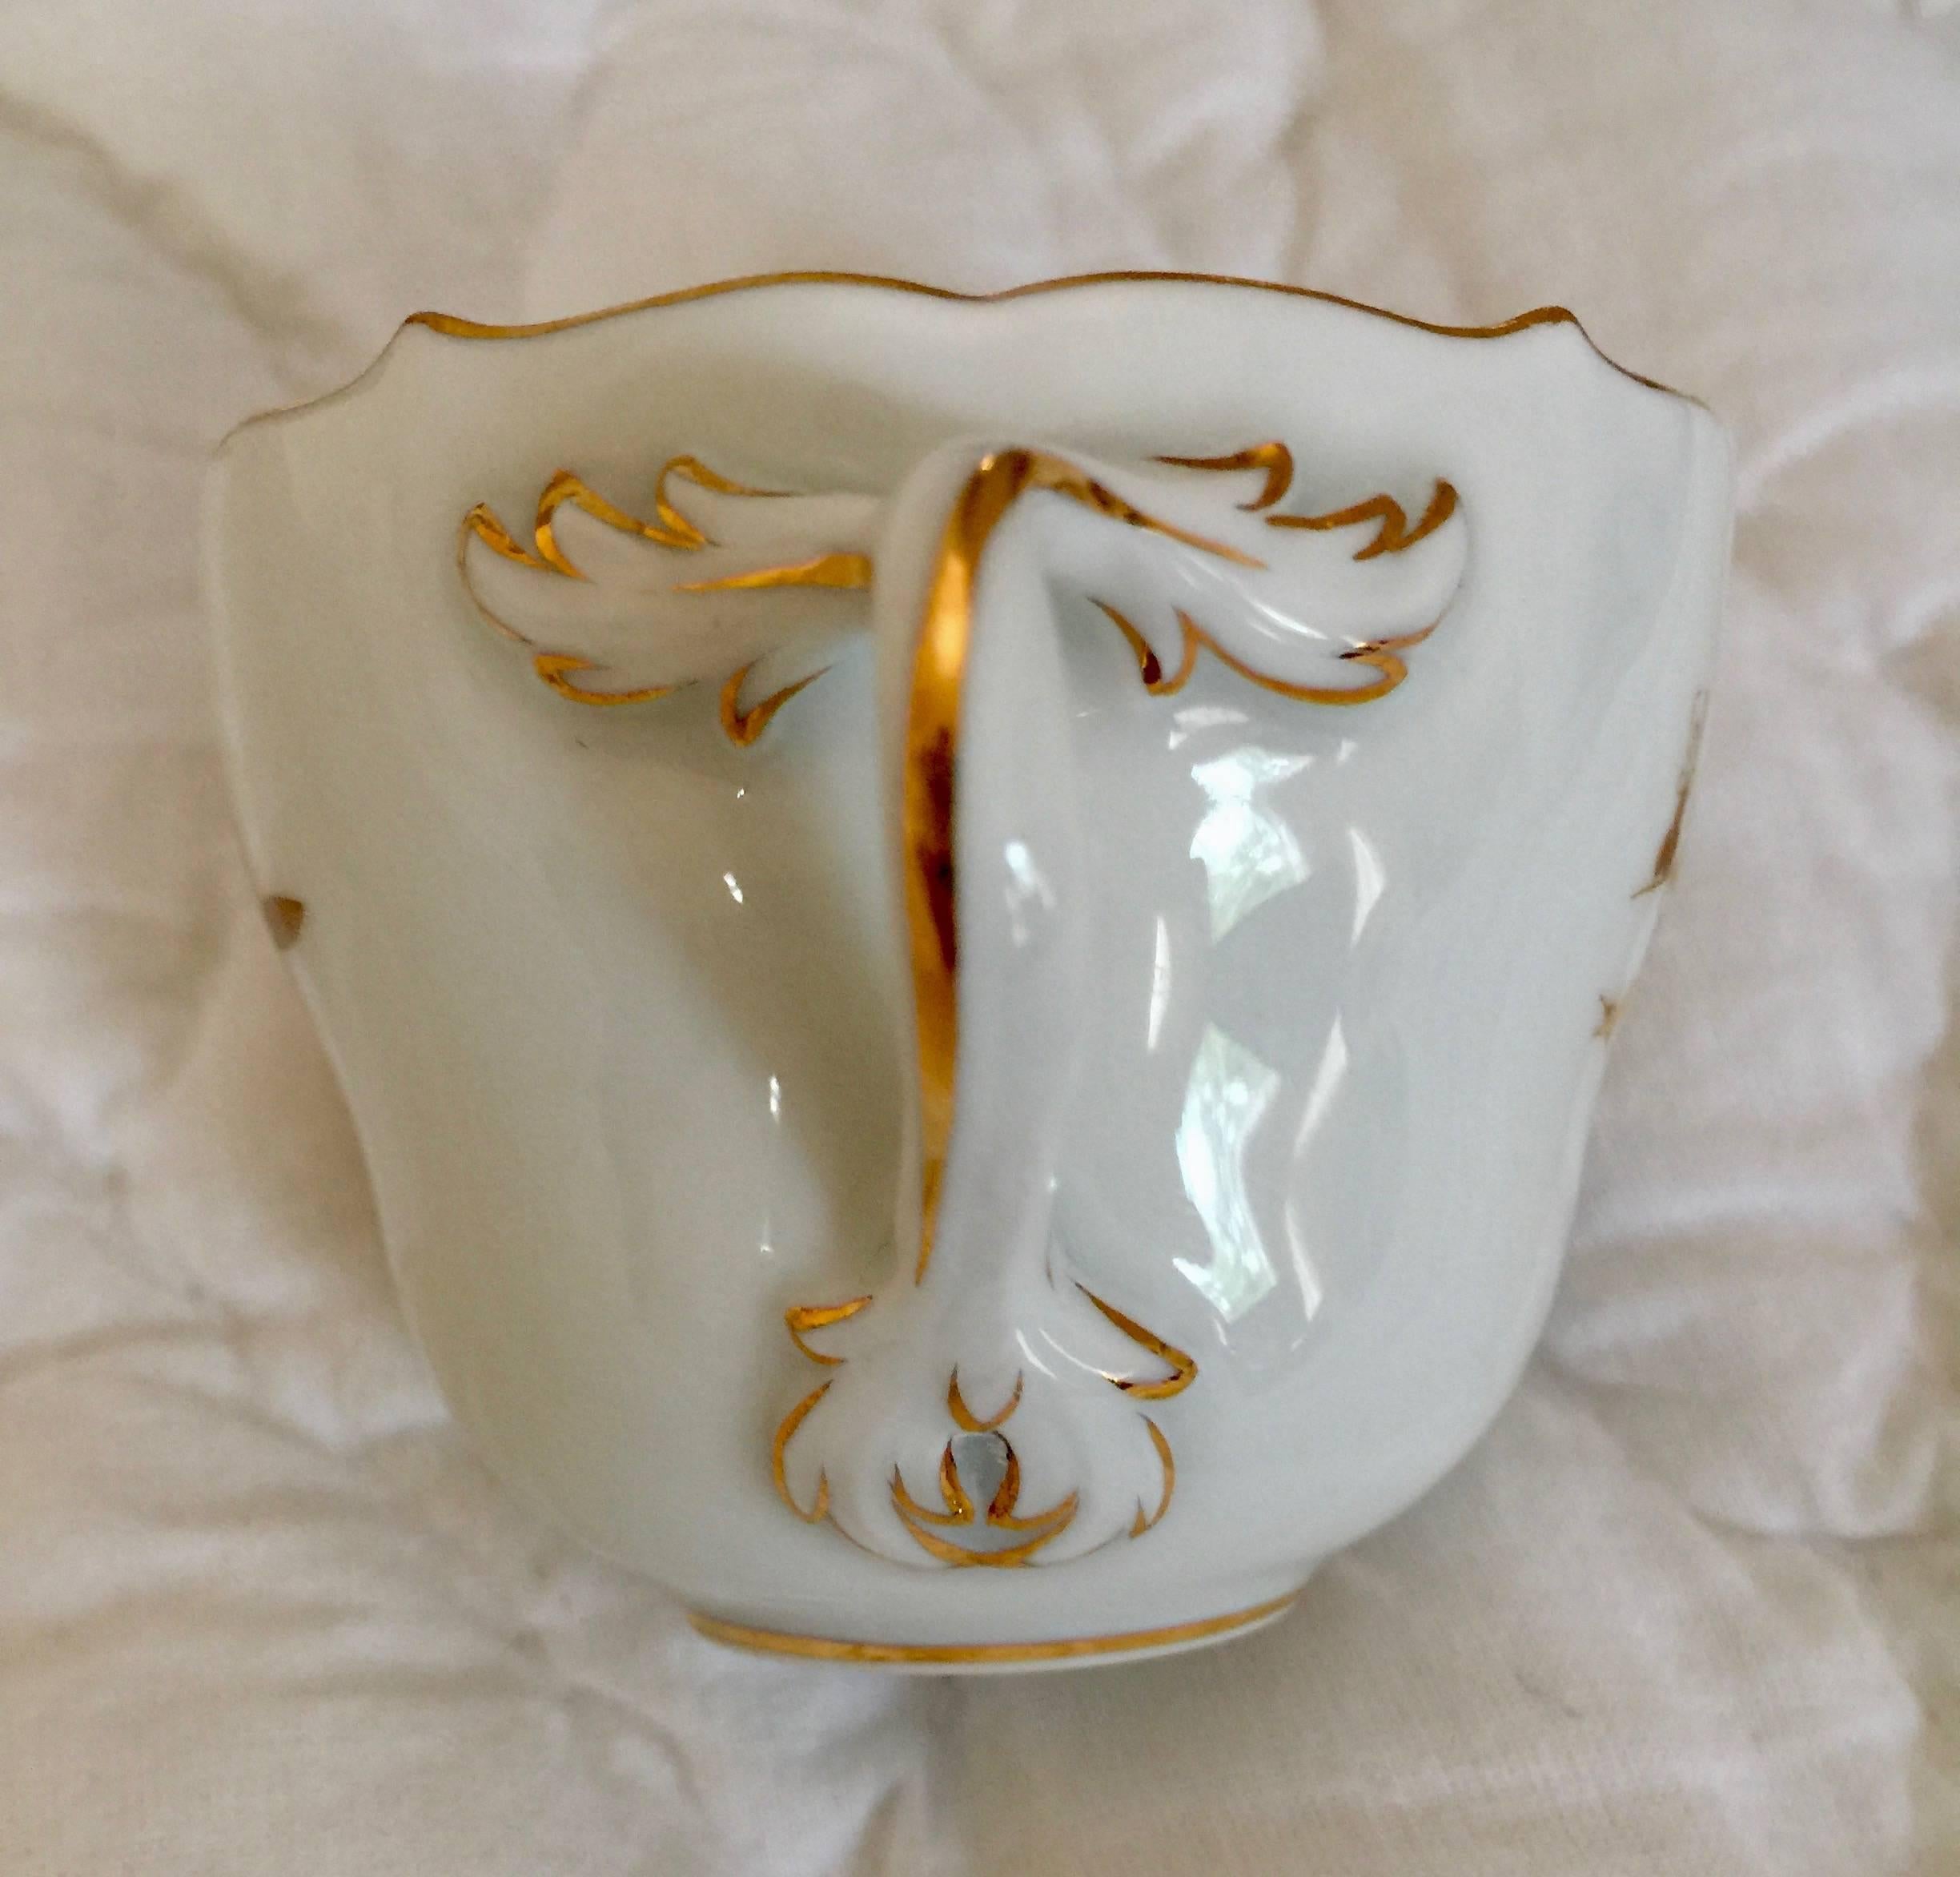 Gilt 19th Century Meissen Porcelain Scalloped Yellow Dragon Demitasse Cup and Saucer